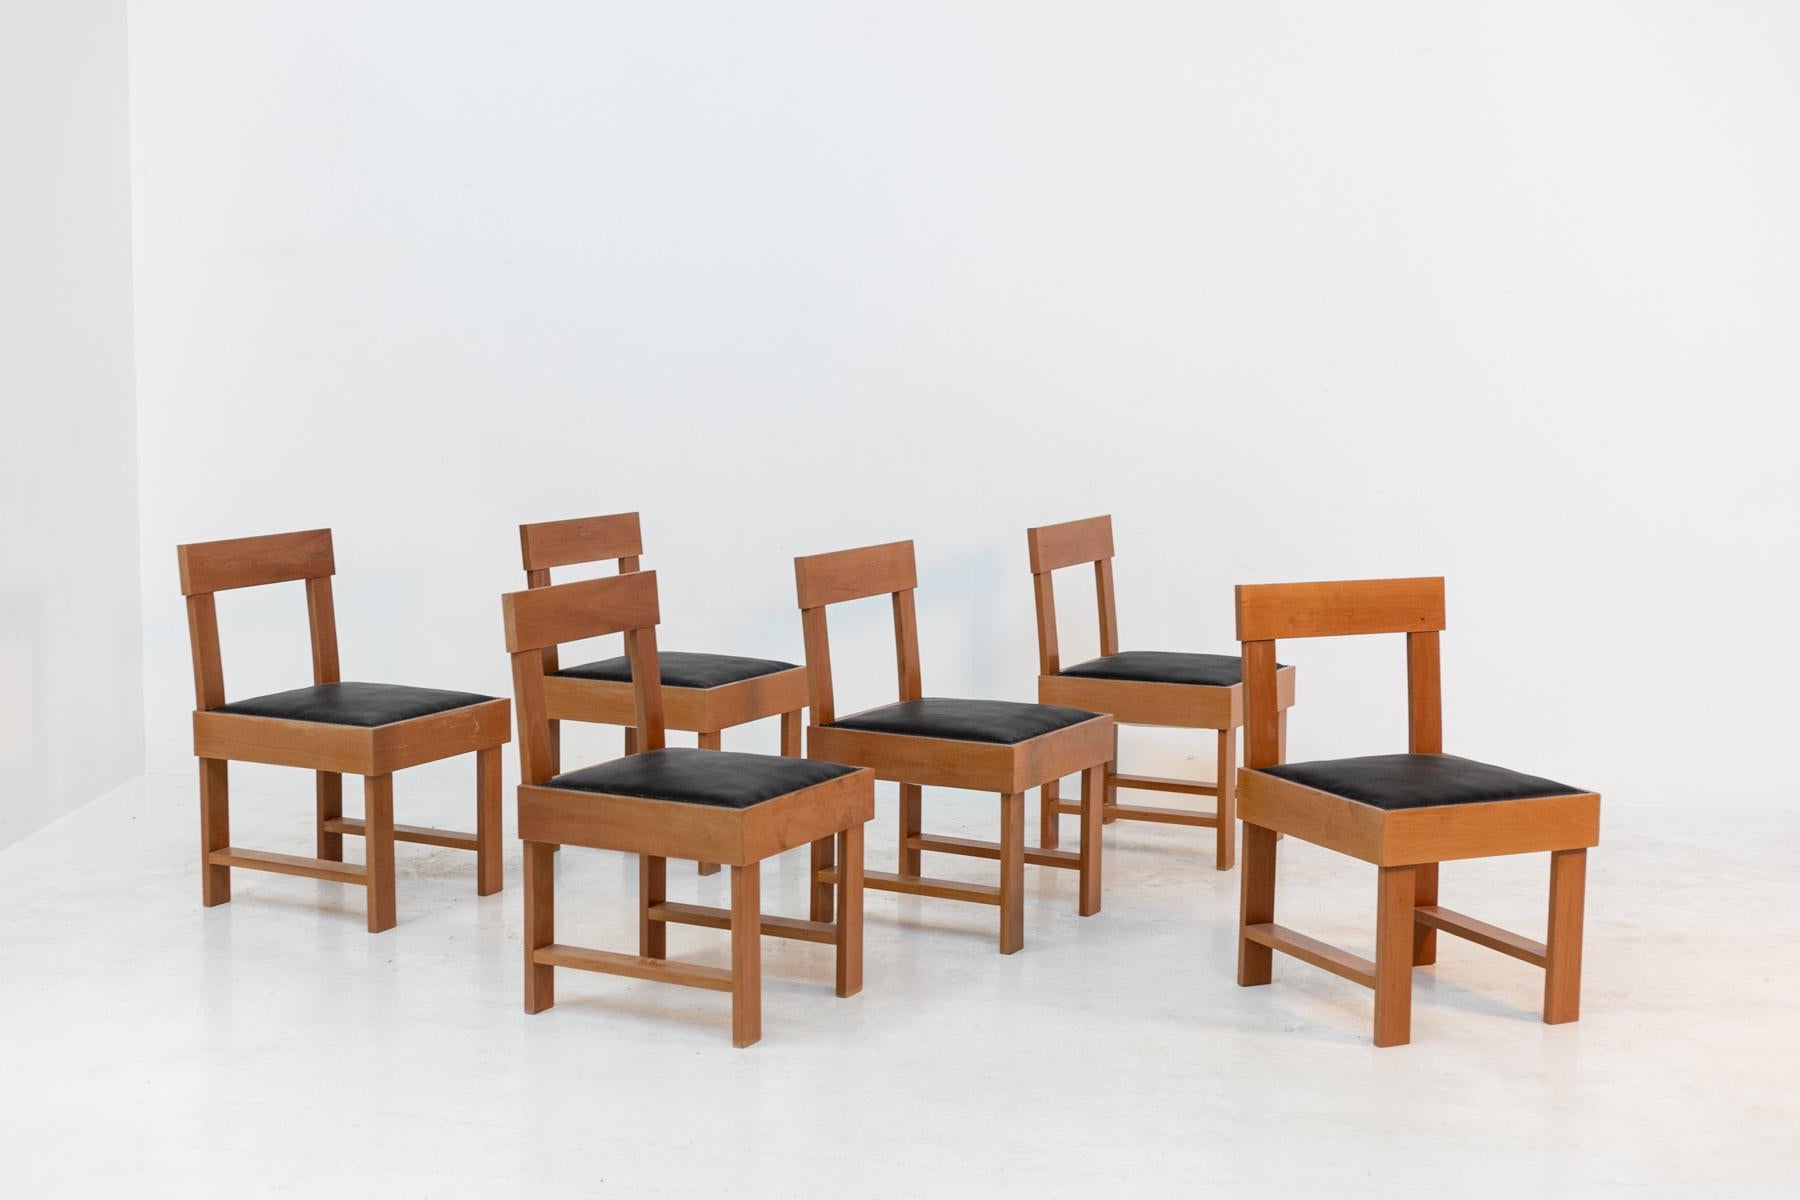 Stunning Italian set consisting of six 20th century BBPR chairs.The chairs are published in the Italian Deco Furniture catalog.In excellent condition because they have recently been restored and reupholstered in fine black leather.The chairs have